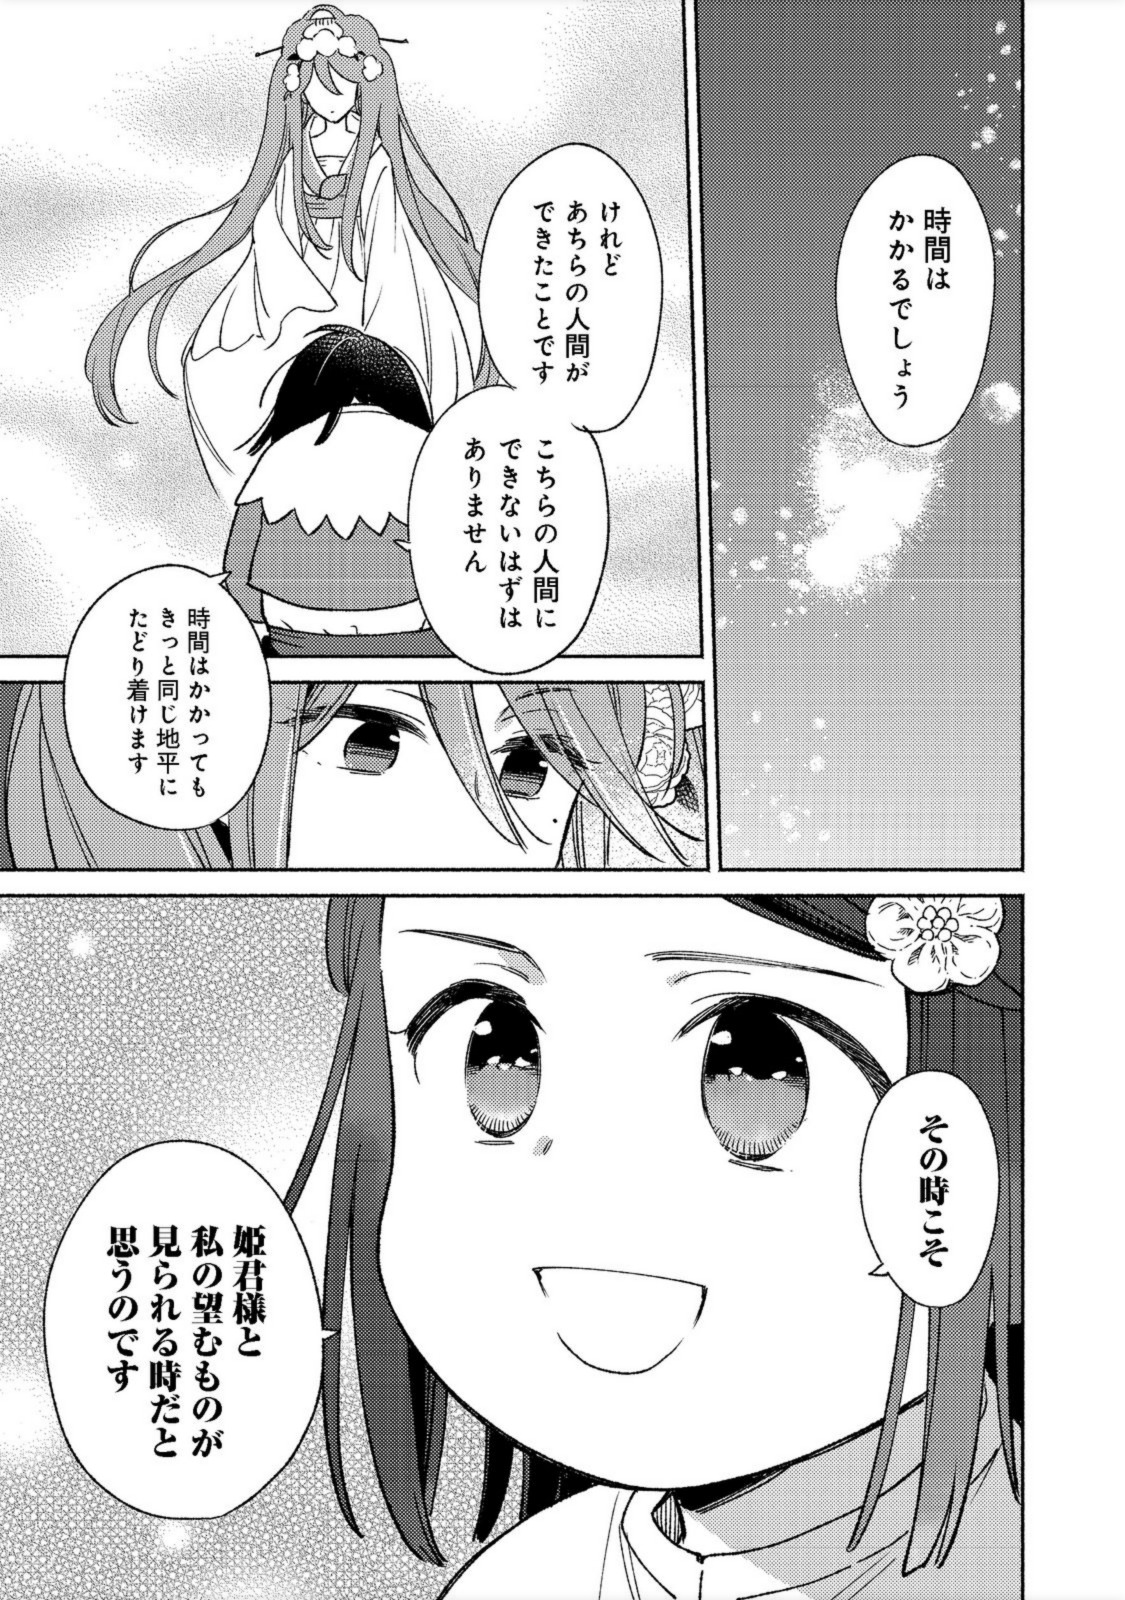 I’m the White Pig Nobleman 第14.1話 - Page 11